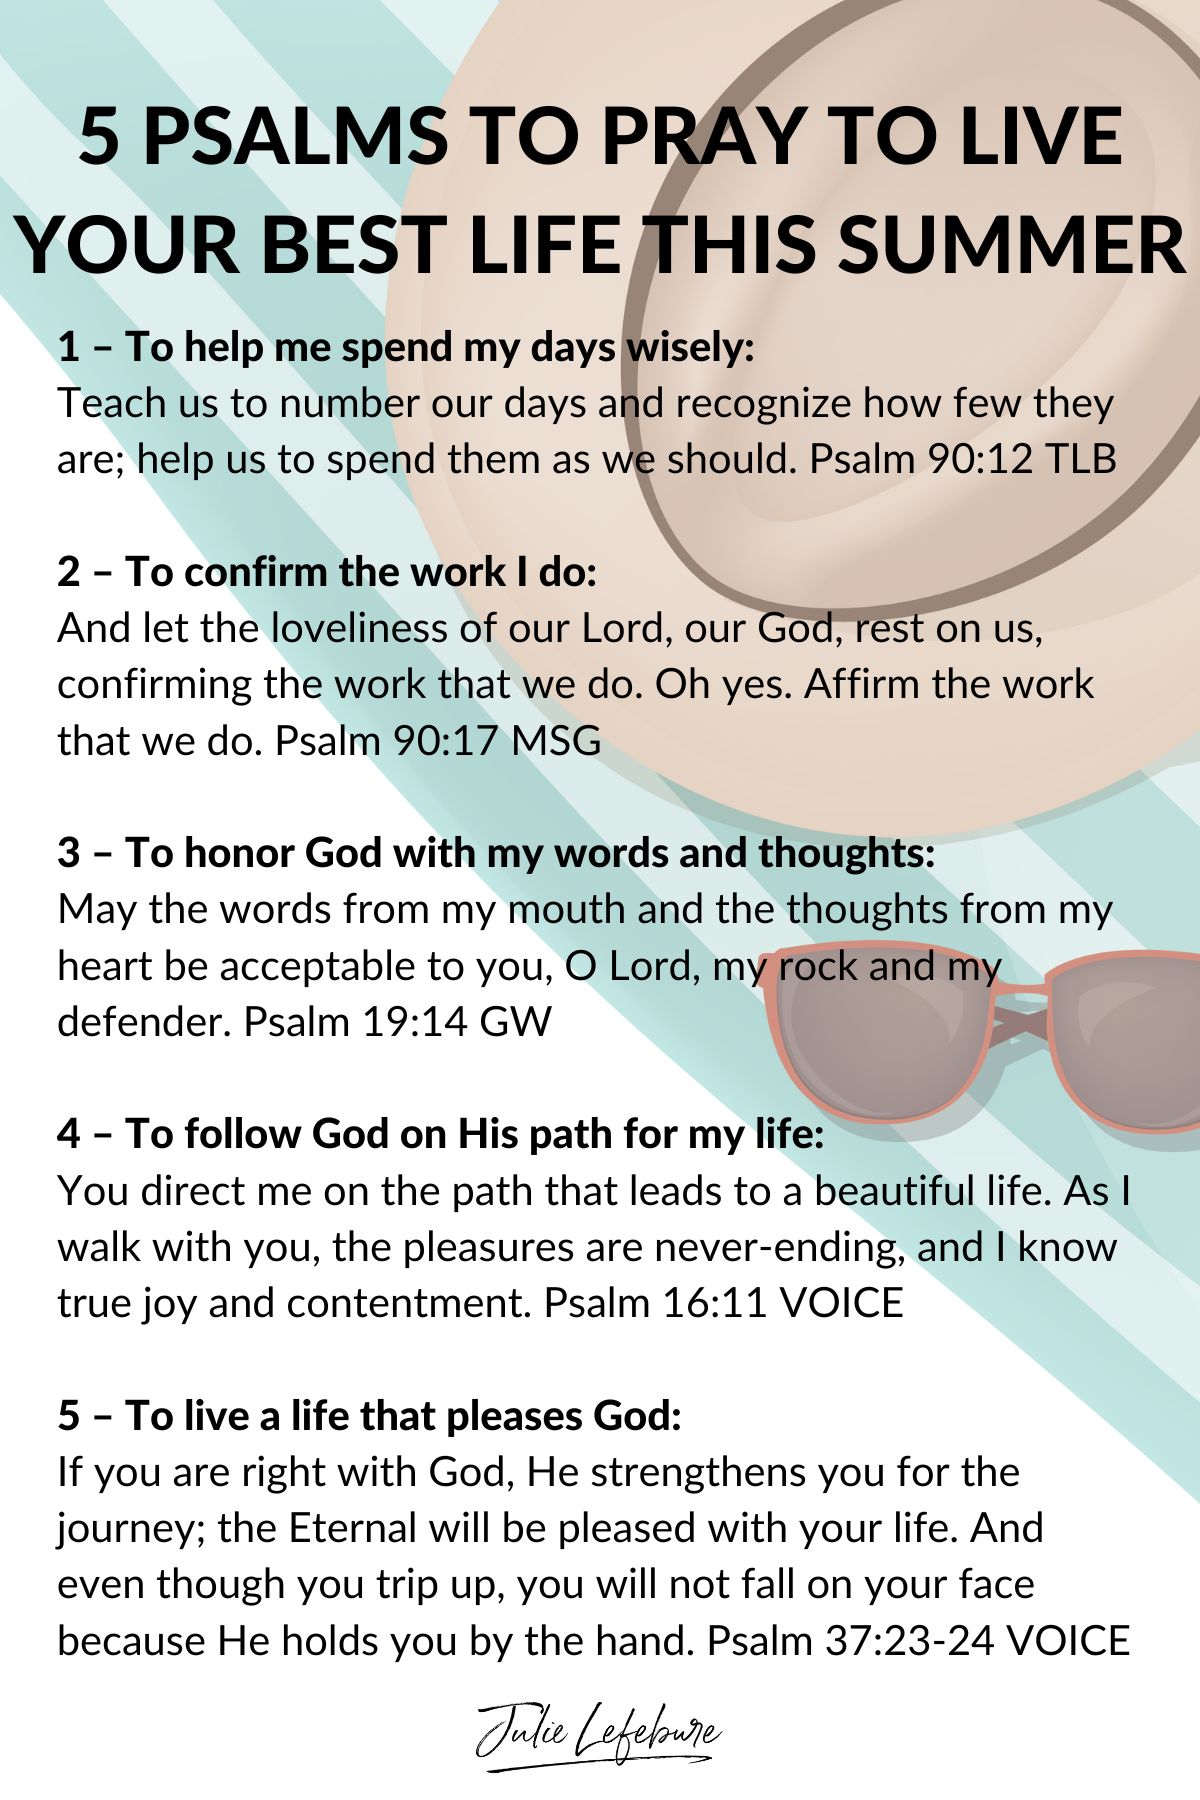 5 Psalms to Pray to Live Your Best Life This Summer